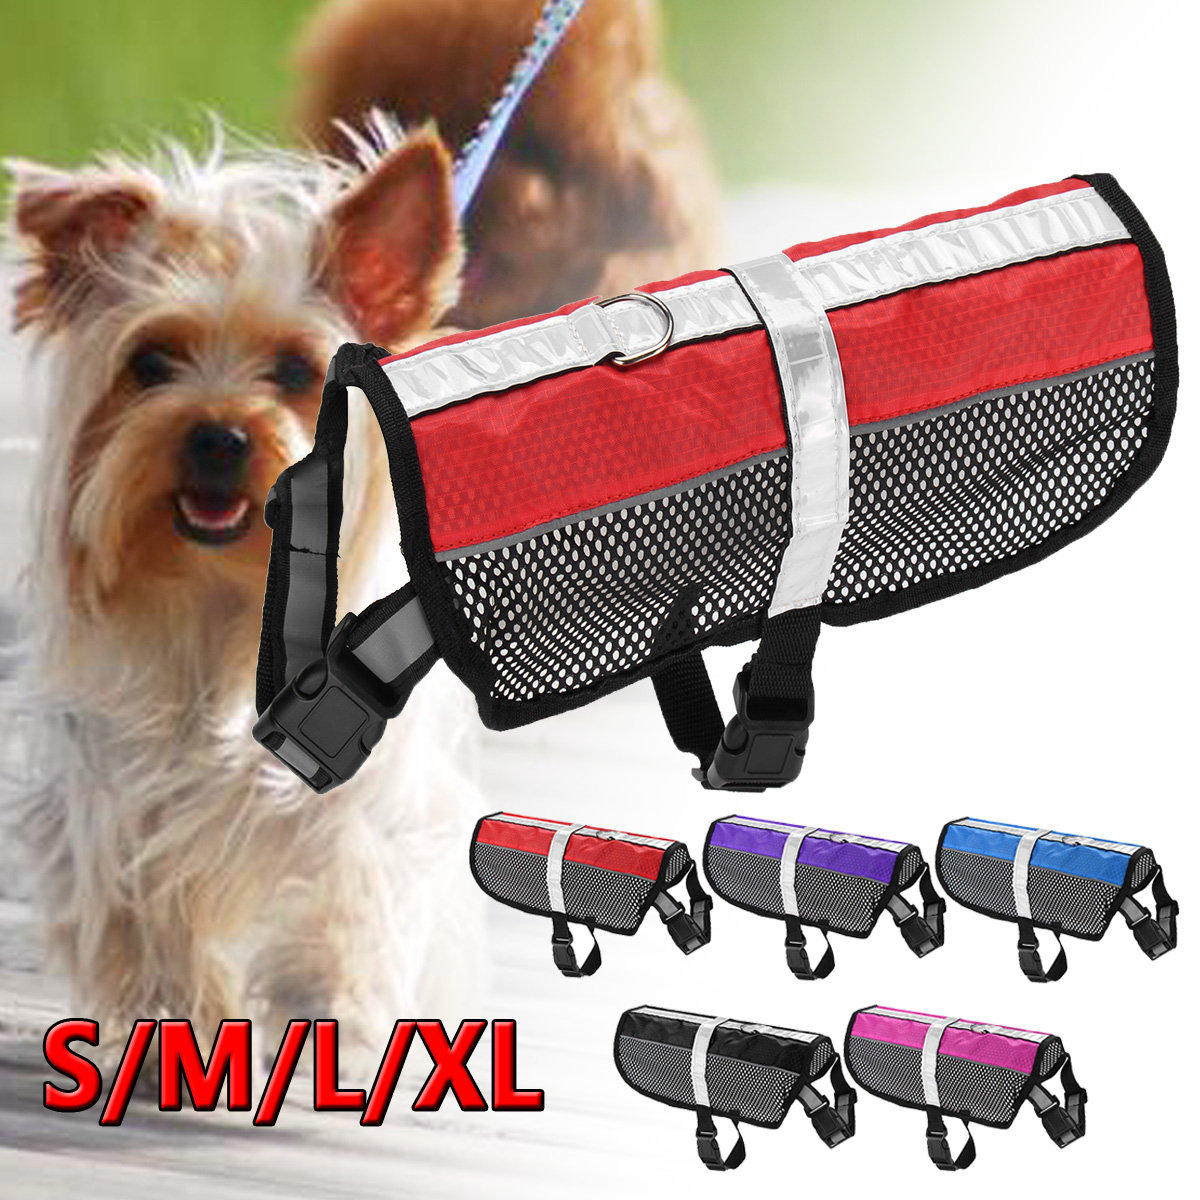 Reflective Safety Mesh Vest Pet Dog Control Harness With Removable Magic Patches